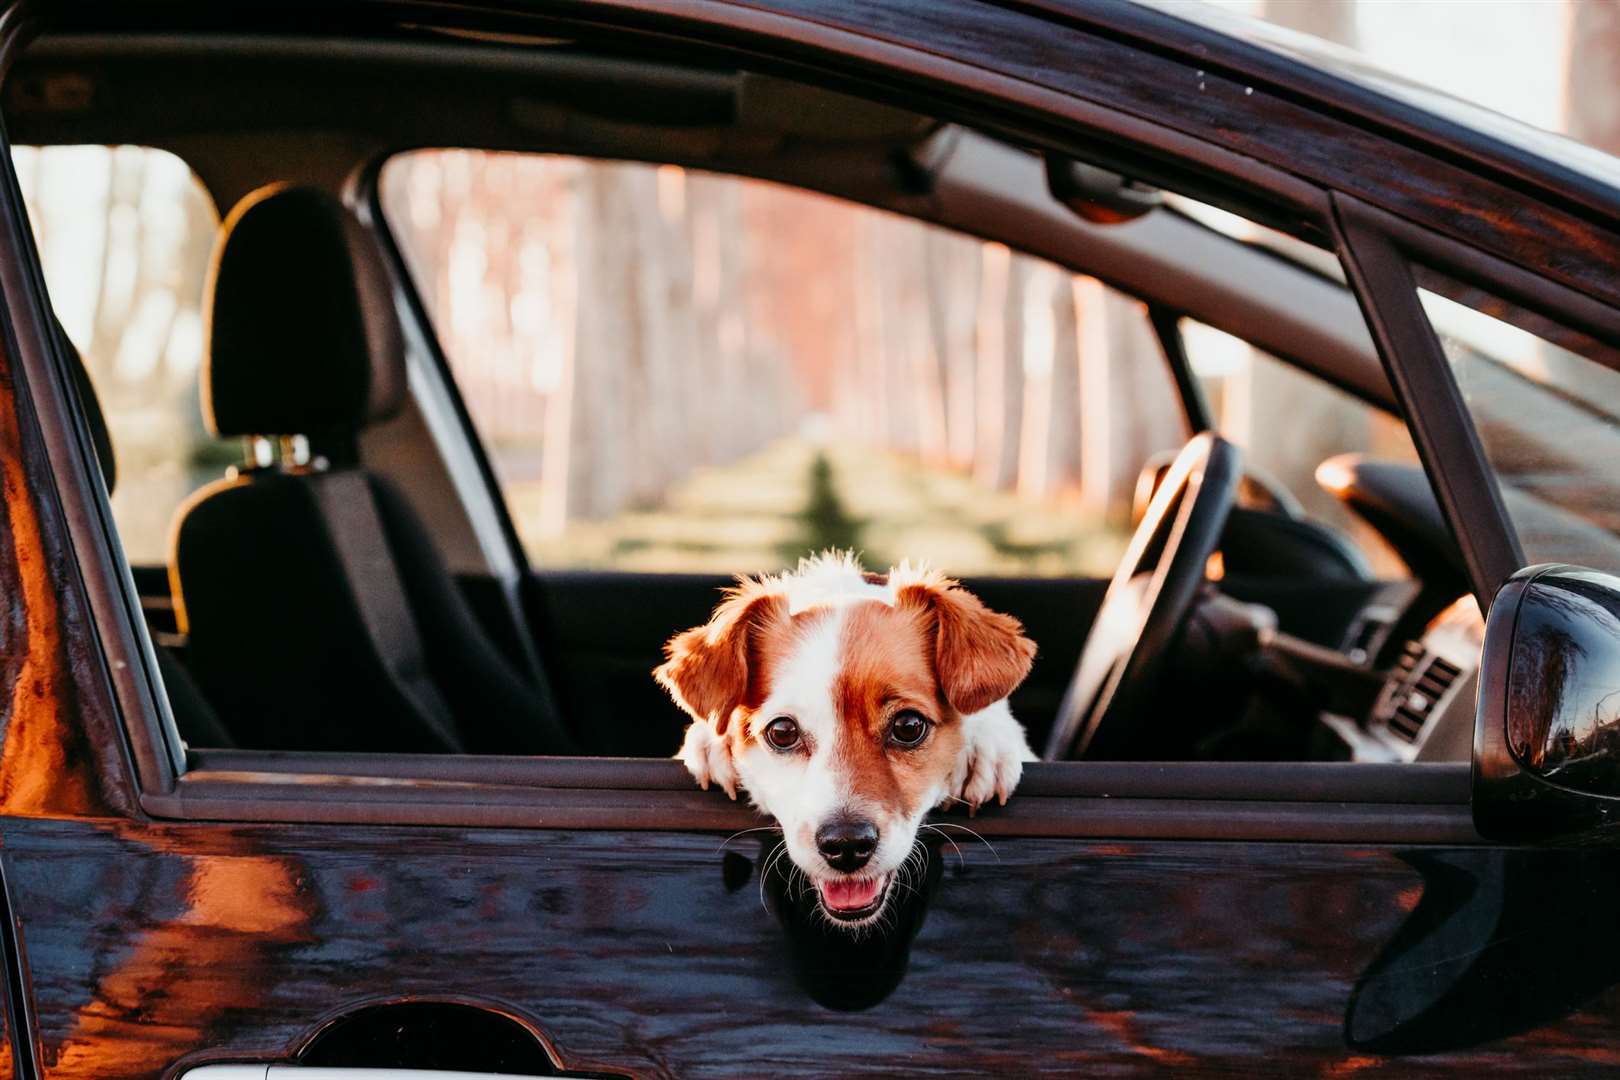 Having long campaigned about leaving dogs in cars the RSPCA says it wants people to think carefully about when to walk too. Photo: Stock photo.